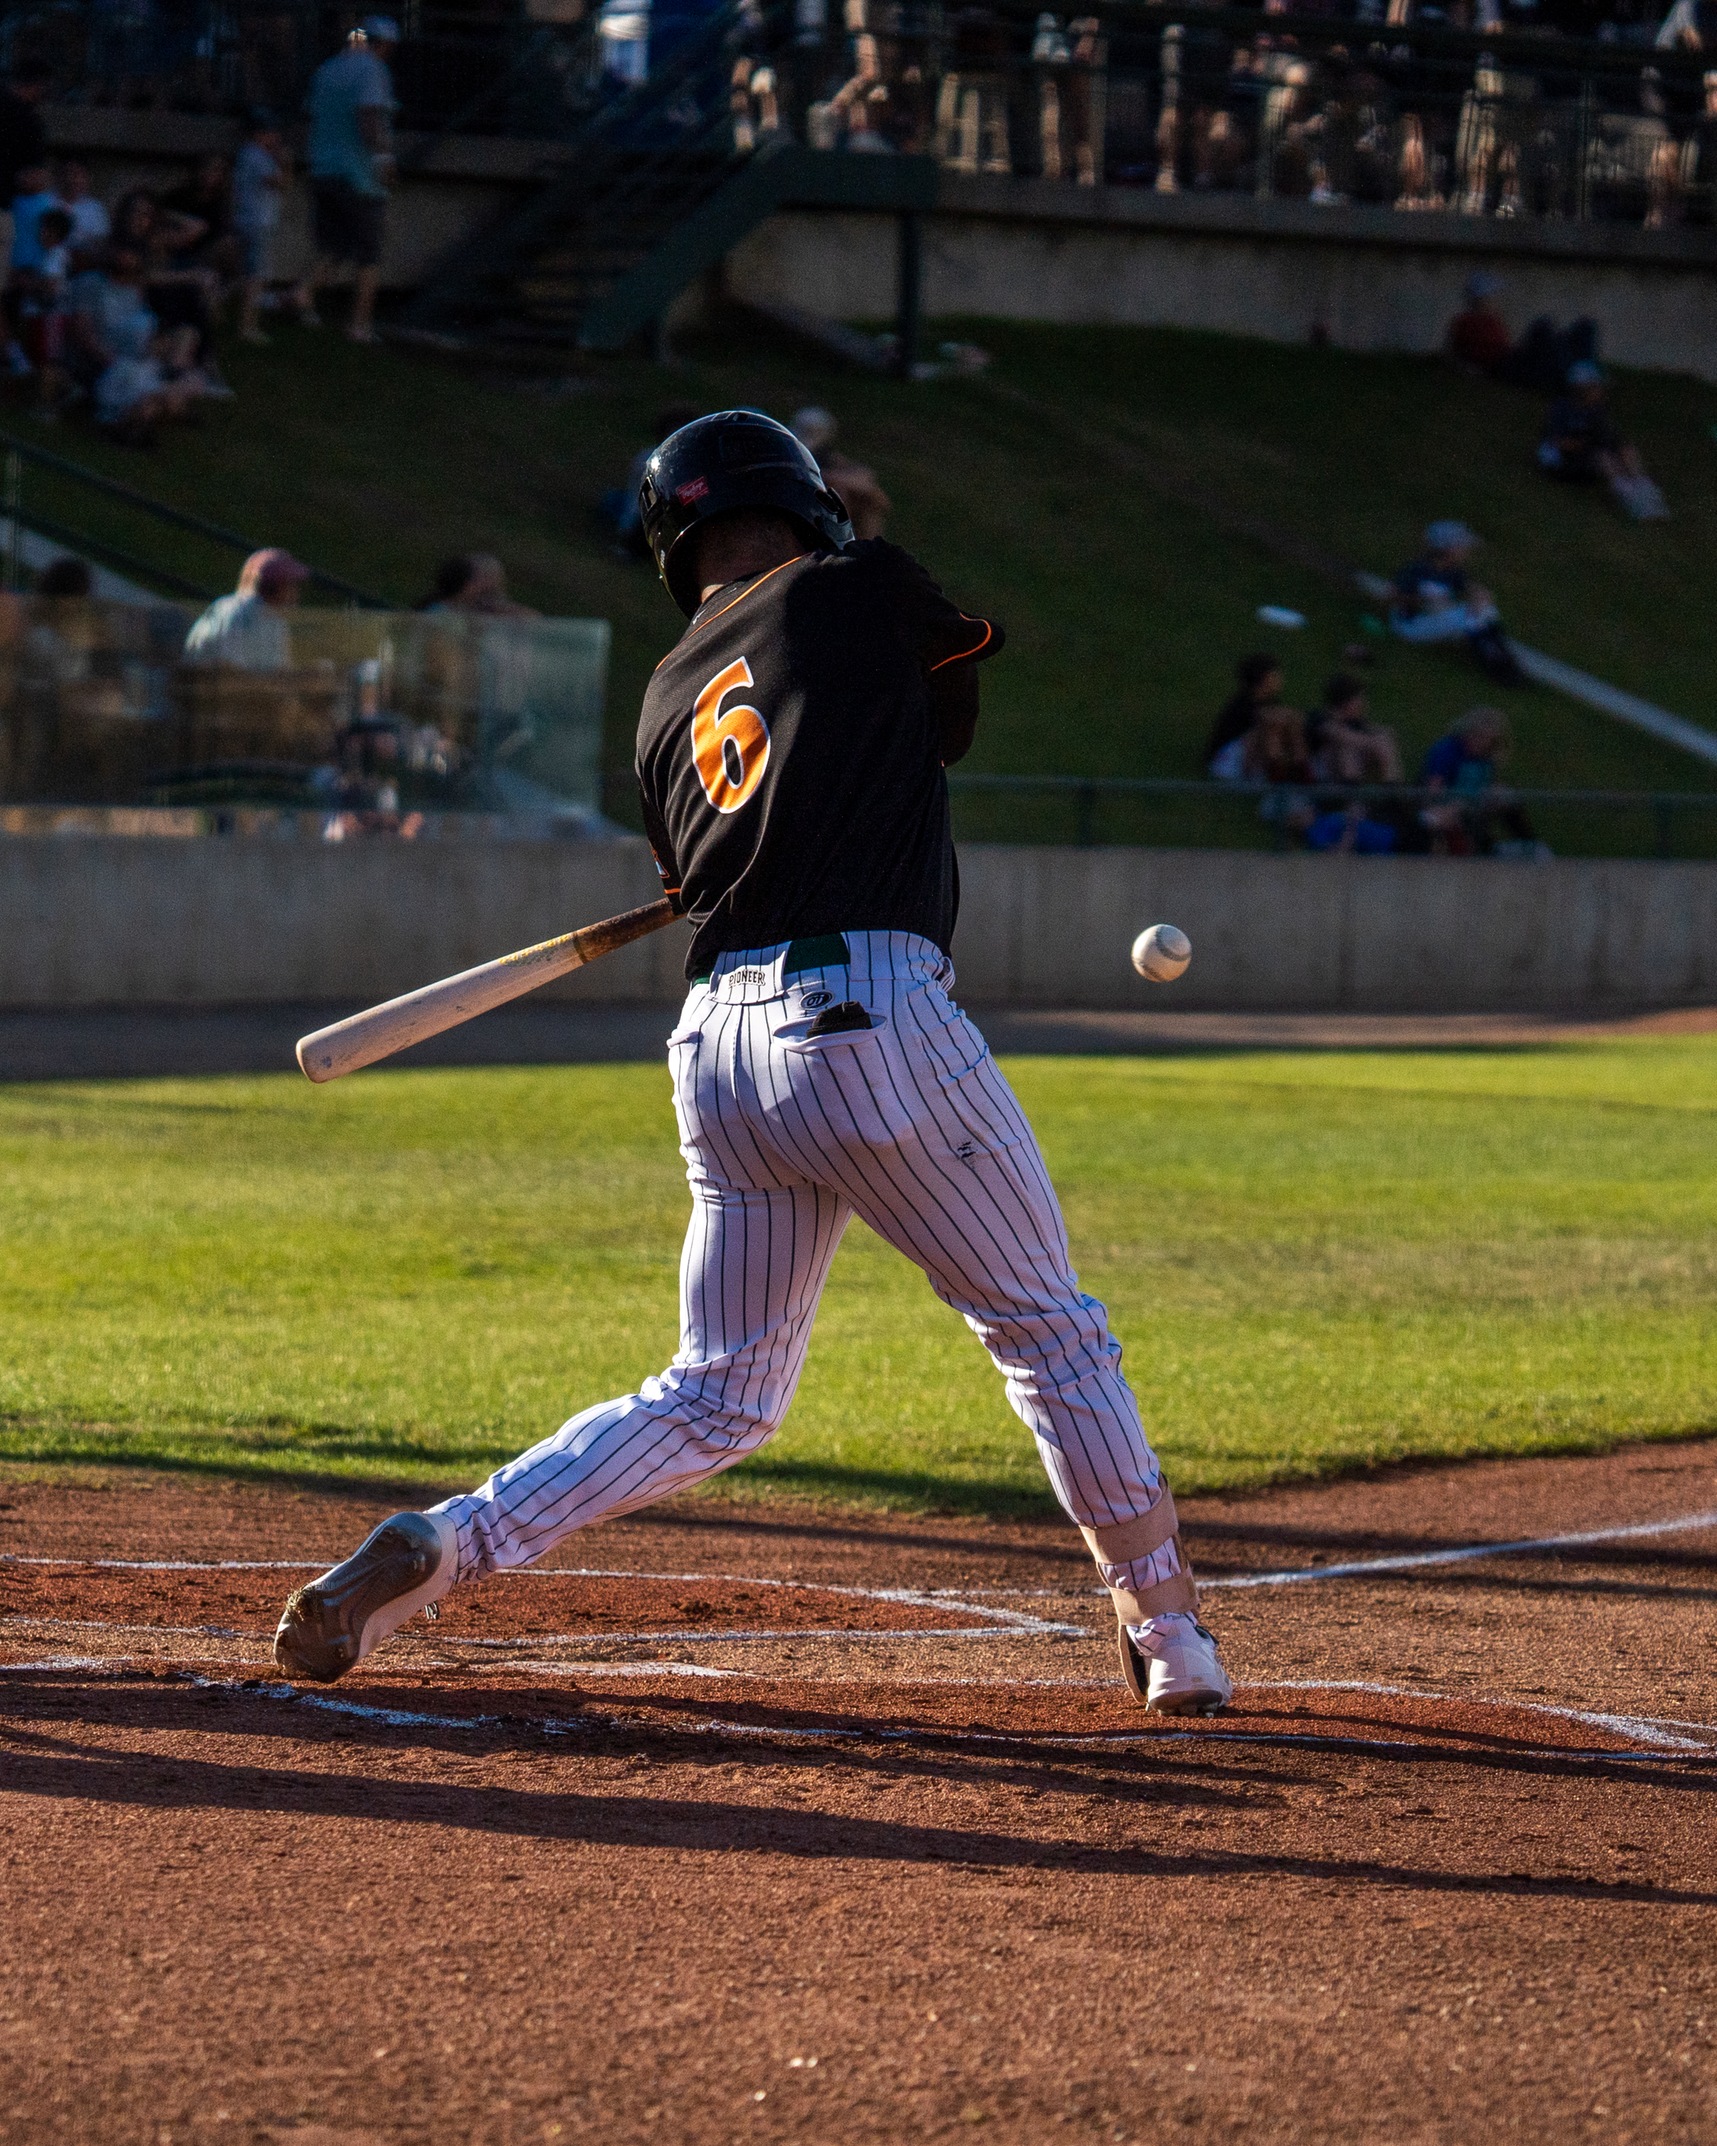 PaddleHeads Earn Fourth Win on Road Trip